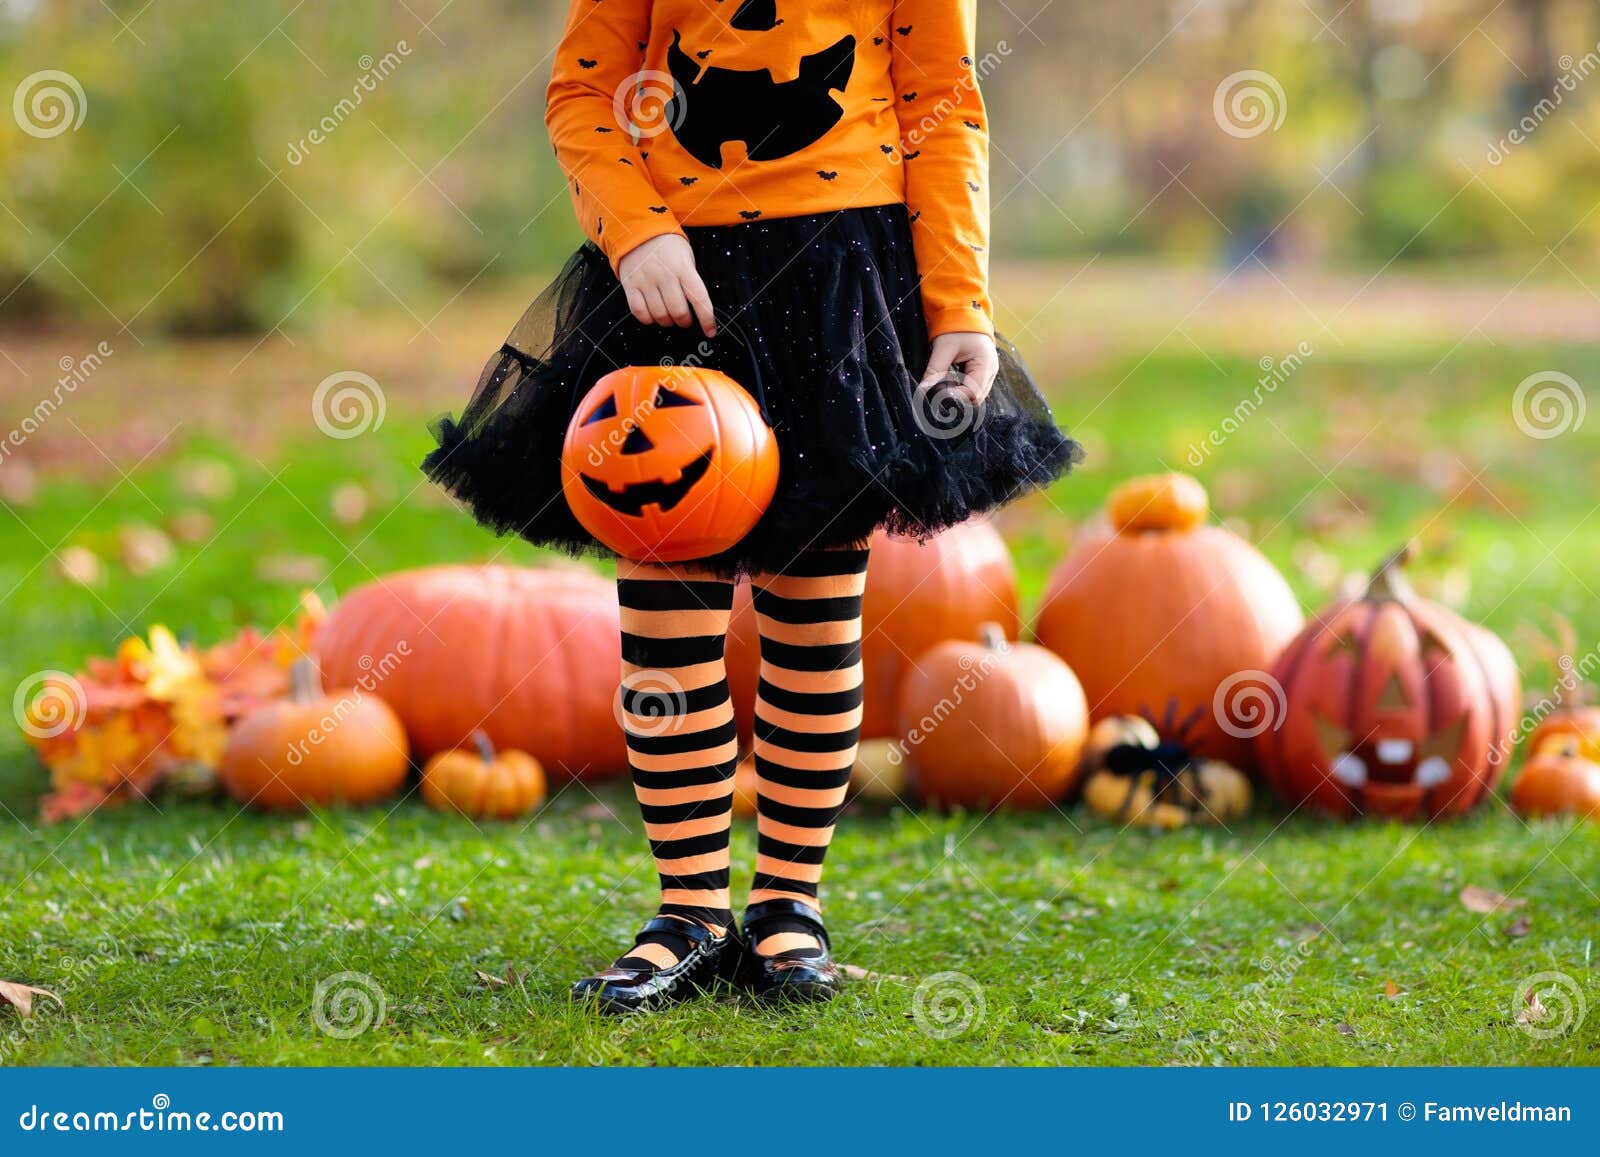 Kids with Pumpkins in Halloween Costumes Stock Image - Image of ...